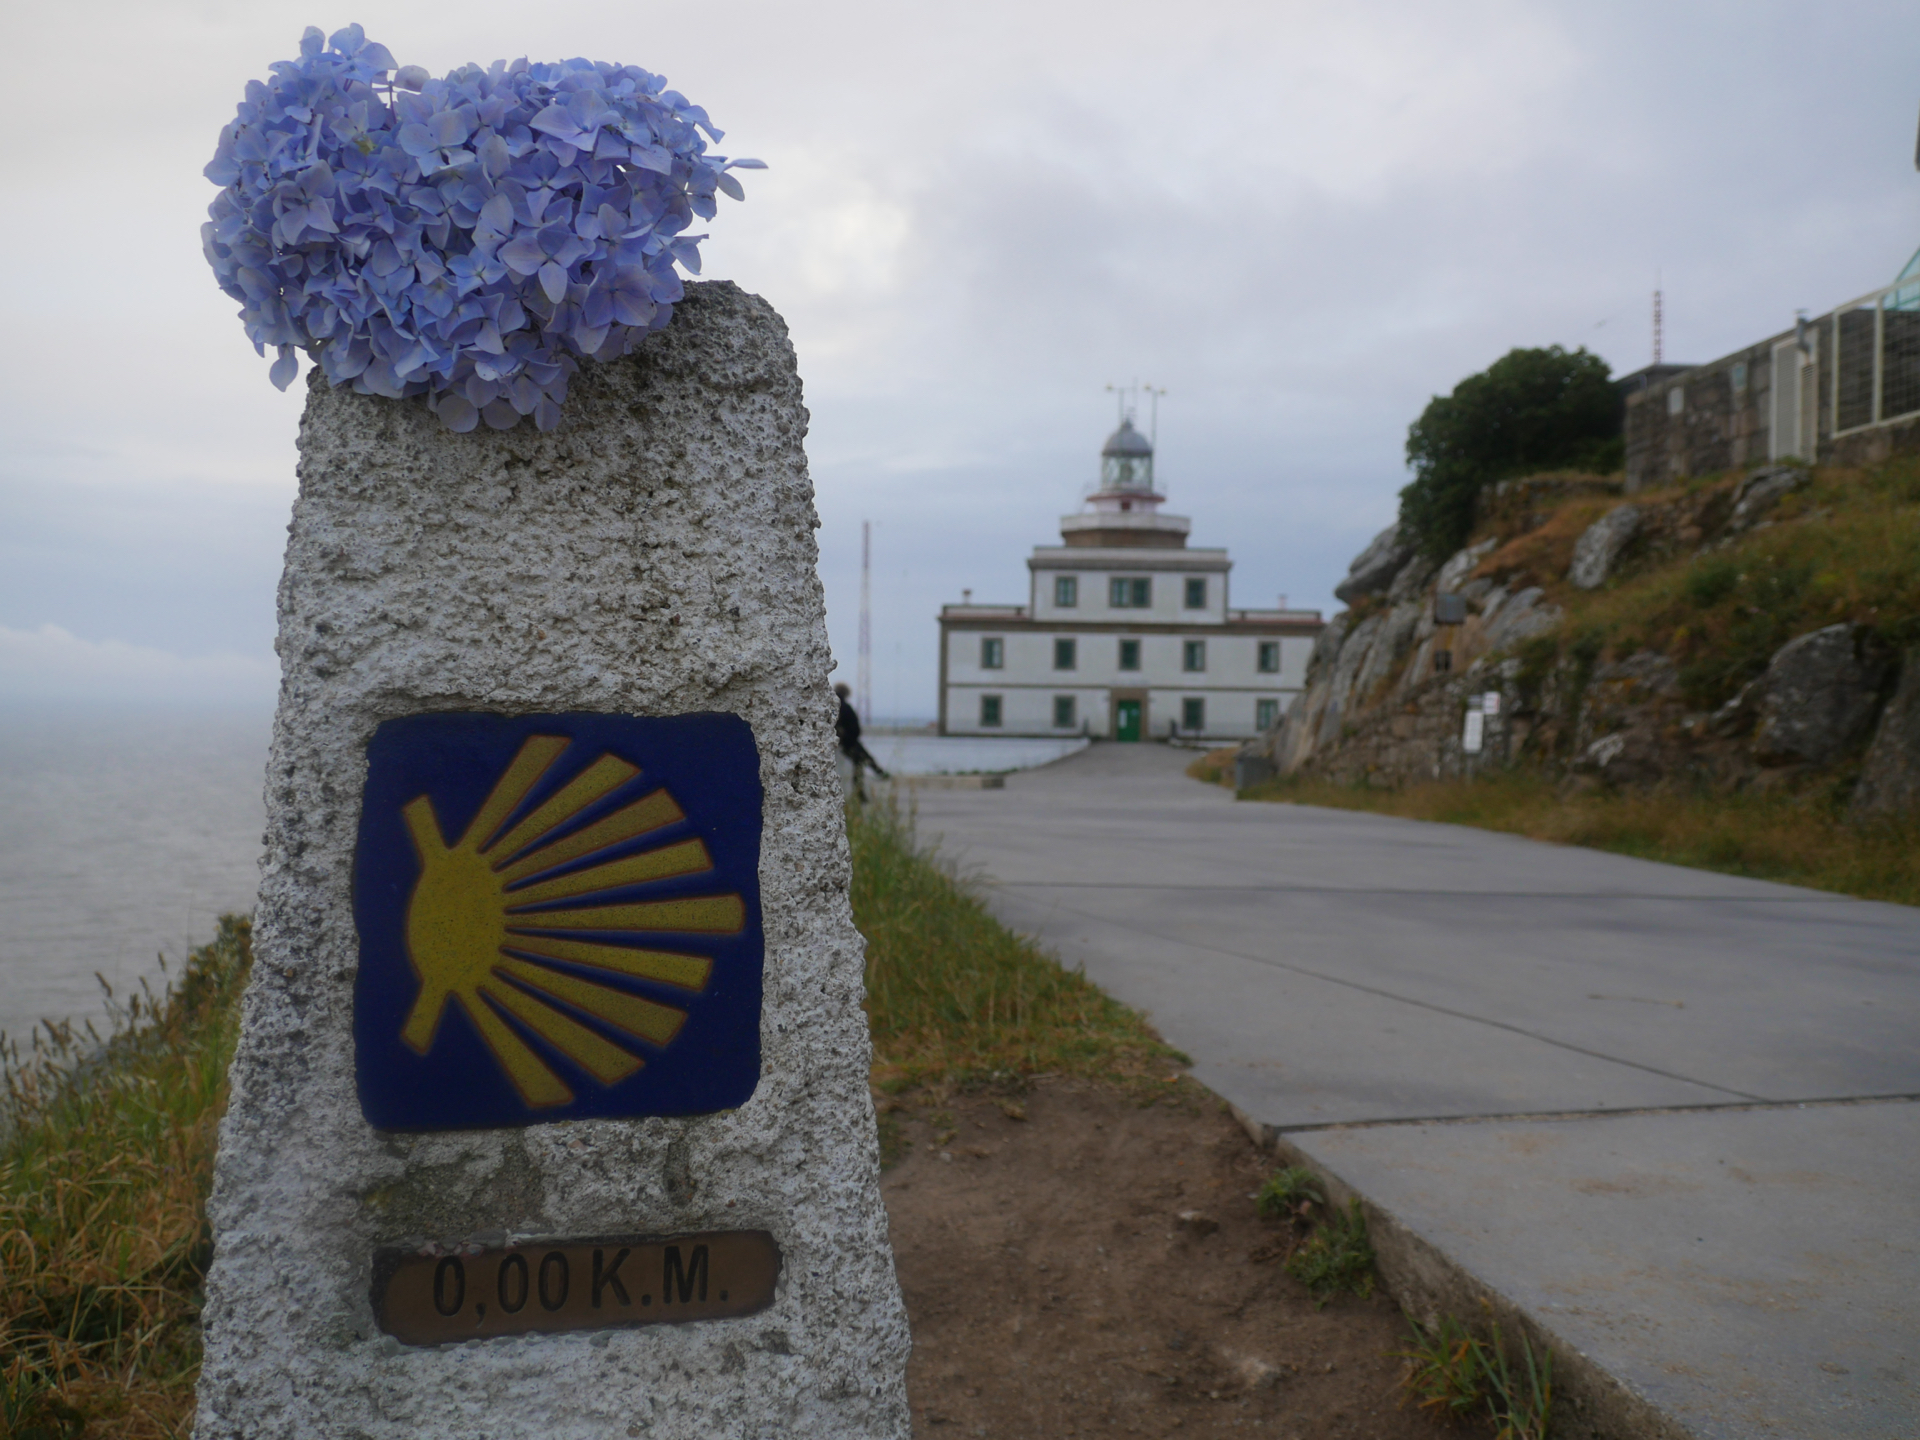 A stone marker labeled "0.00 K.M." marks the end of the Camino Finisterre at the end of the peninsula in Finisterre.